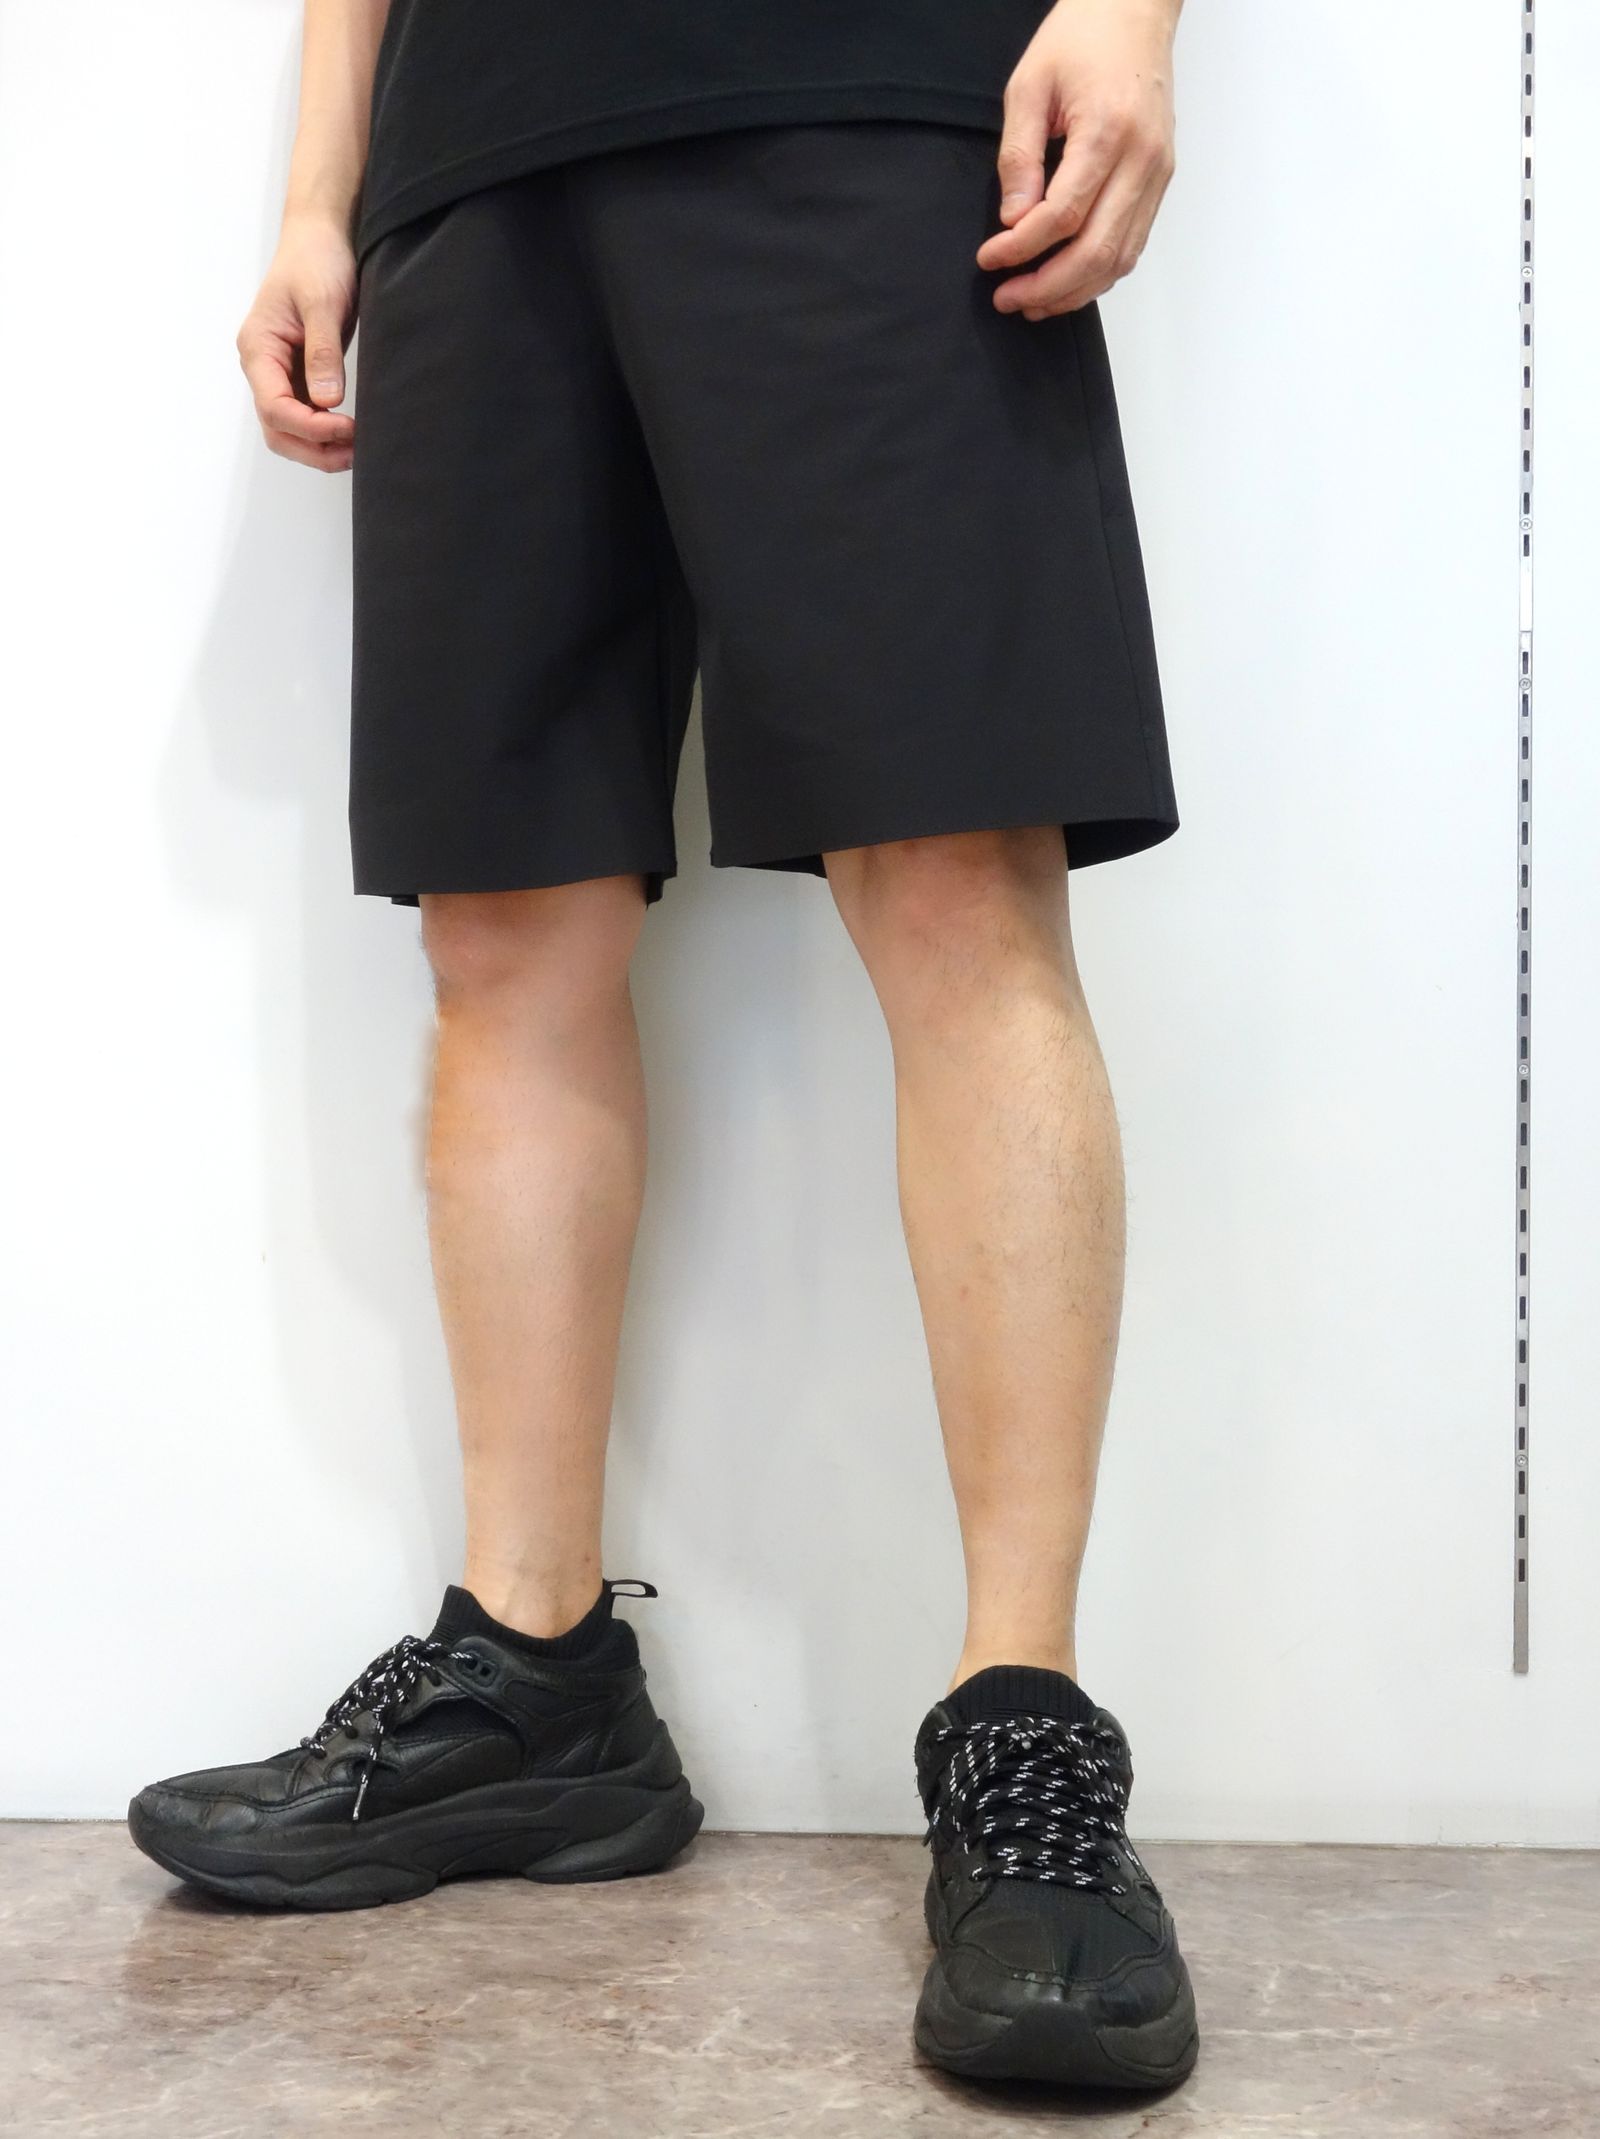 SY32 by SWEET YEARS - HIGH-TECH SHORT PANTS / 11451 / ハーフパンツ